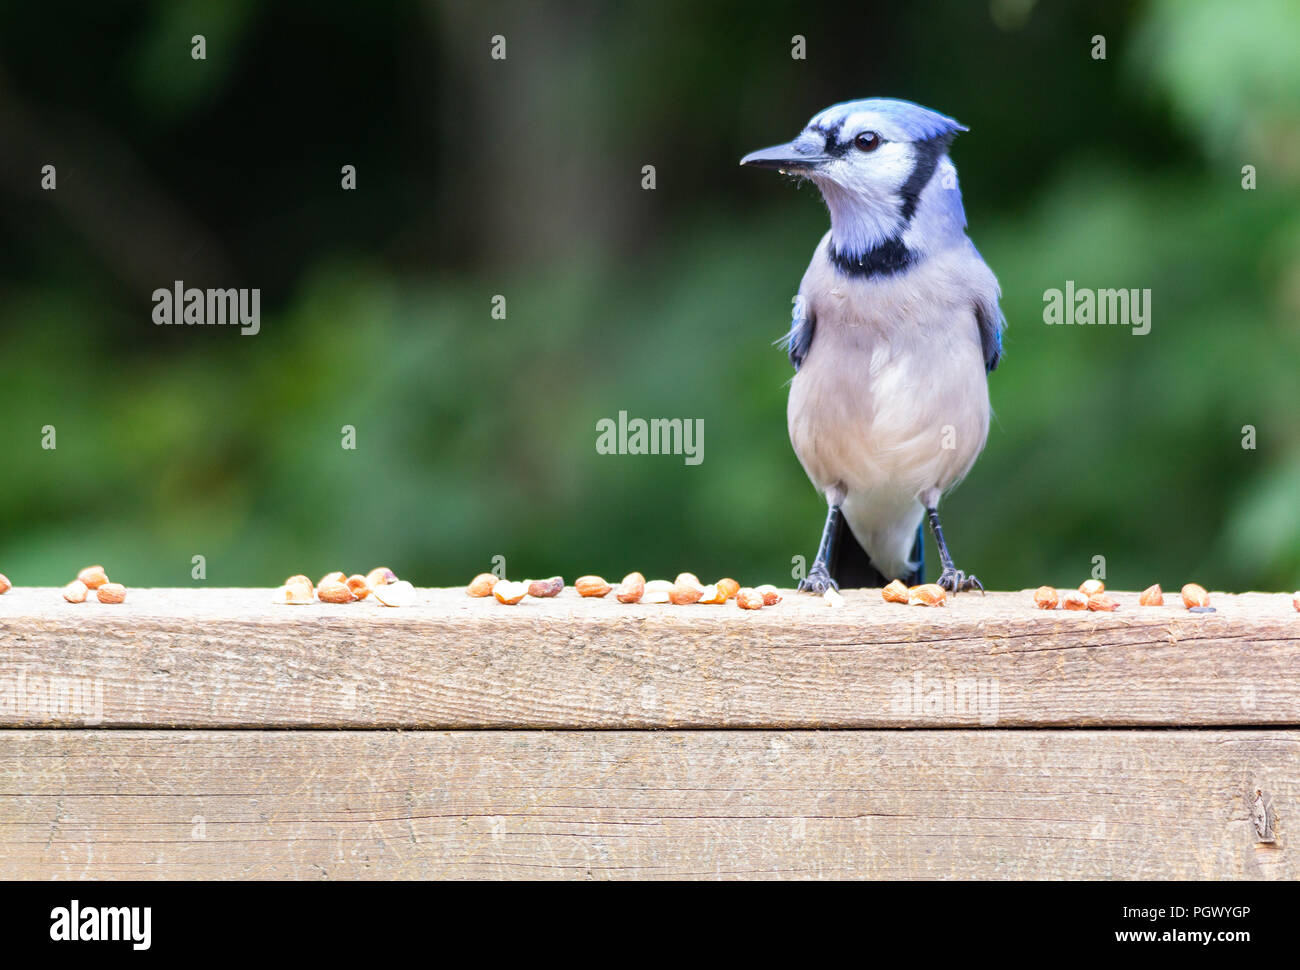 Side profile of a blue jay perched on a weathered wood deck railing, checking out his surroundings before grabbing the shelled peanuts sitting there. Stock Photo